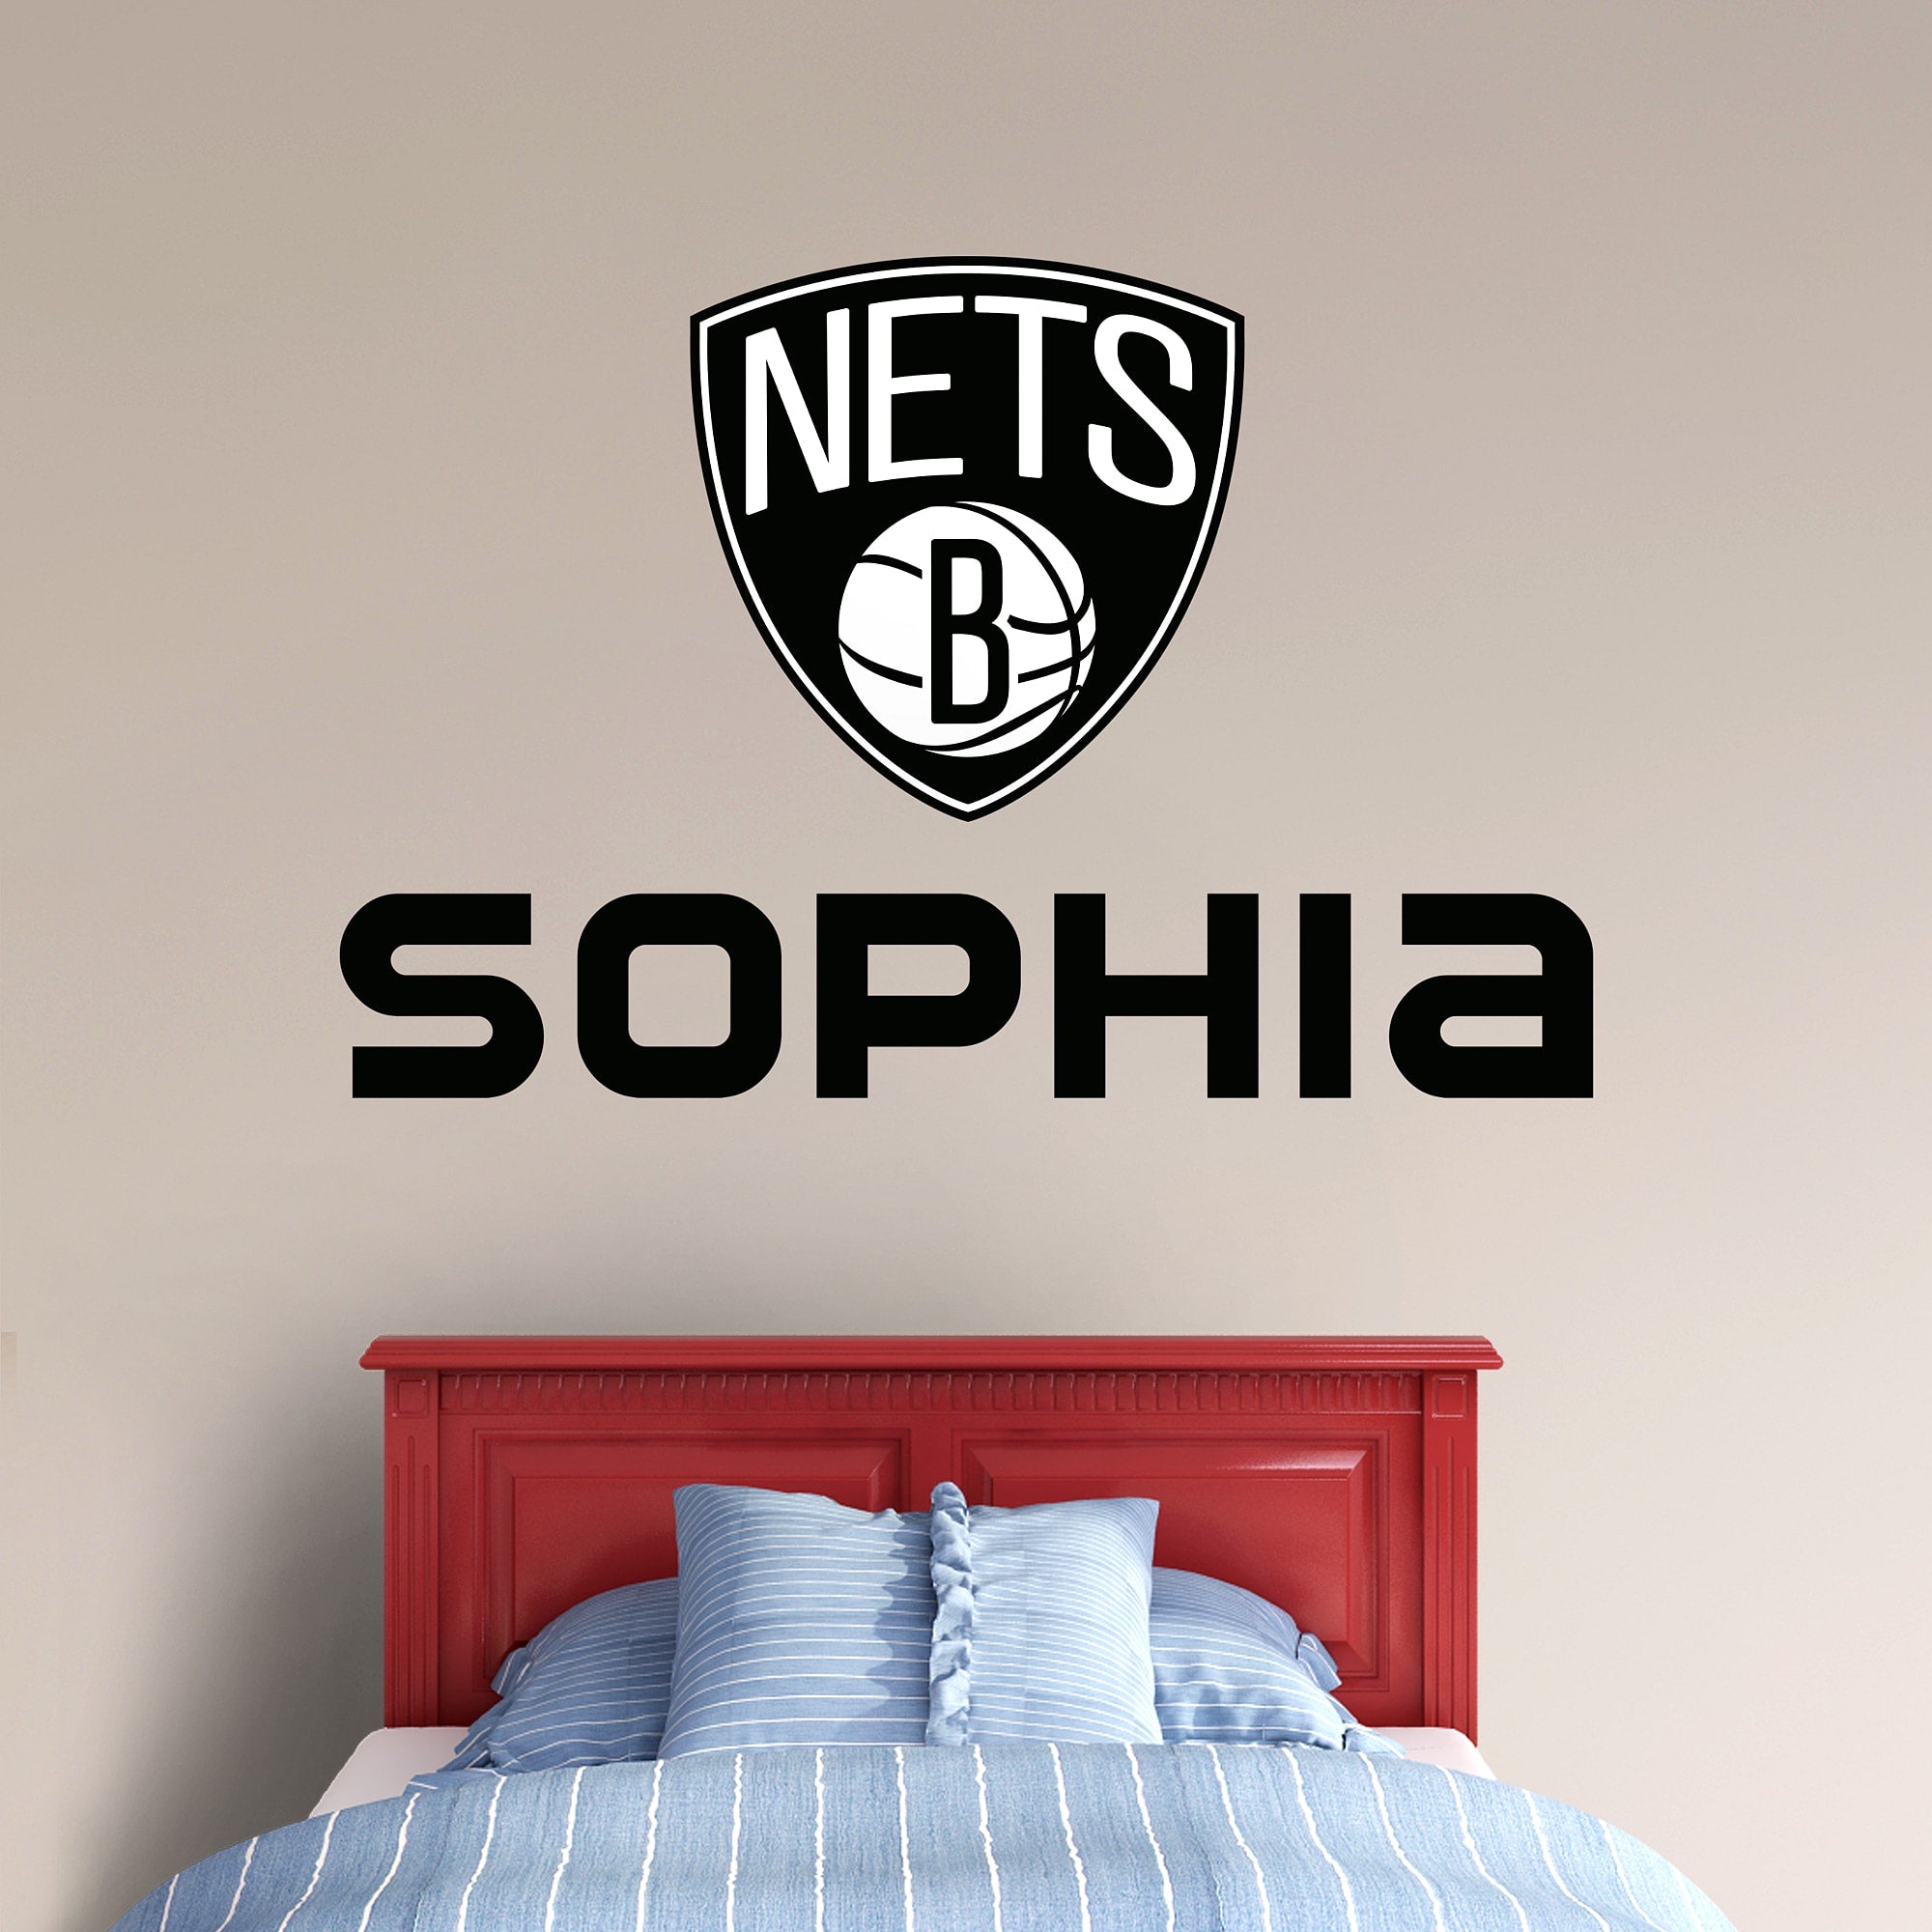 Brooklyn Nets: Stacked Personalized Name - Officially Licensed NBA Transfer Decal in Black (52"W x 39.5"H) by Fathead | Vinyl